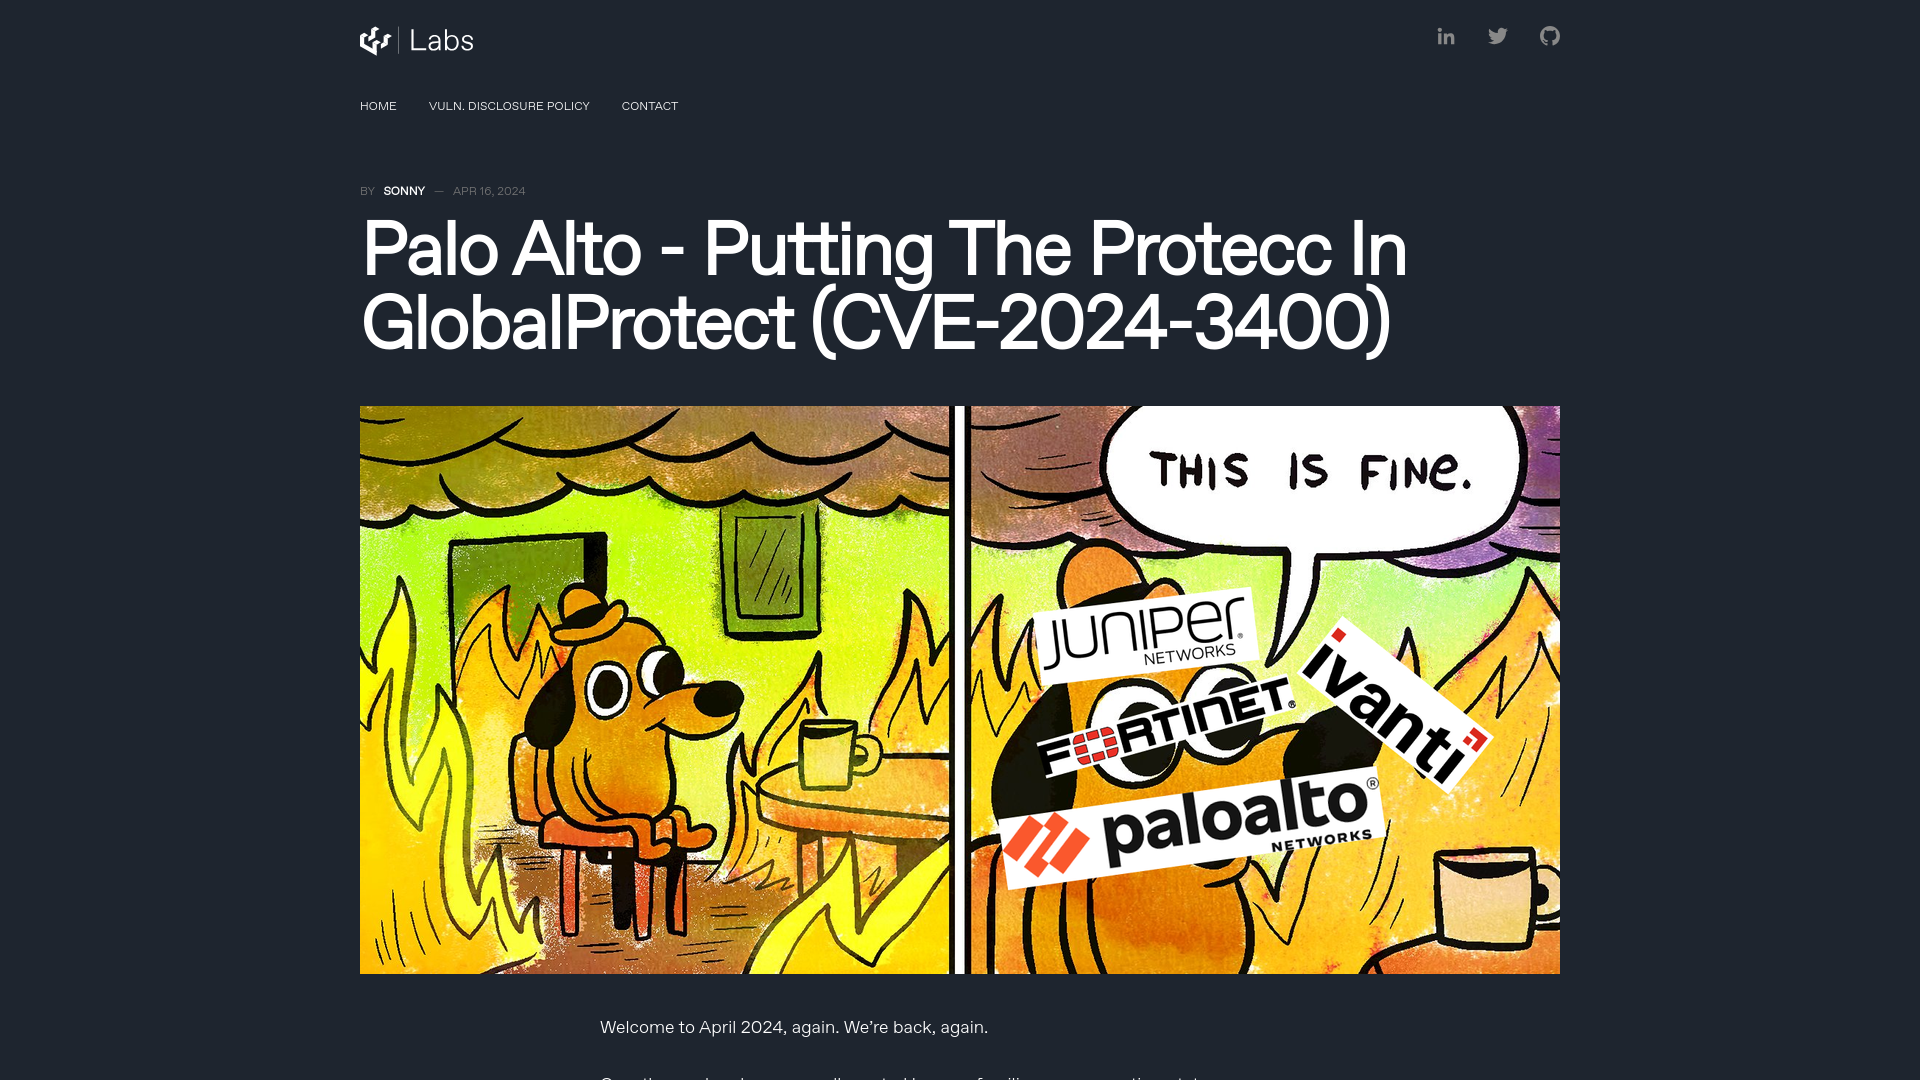 Palo Alto - Putting The Protecc In GlobalProtect (CVE-2024-3400)